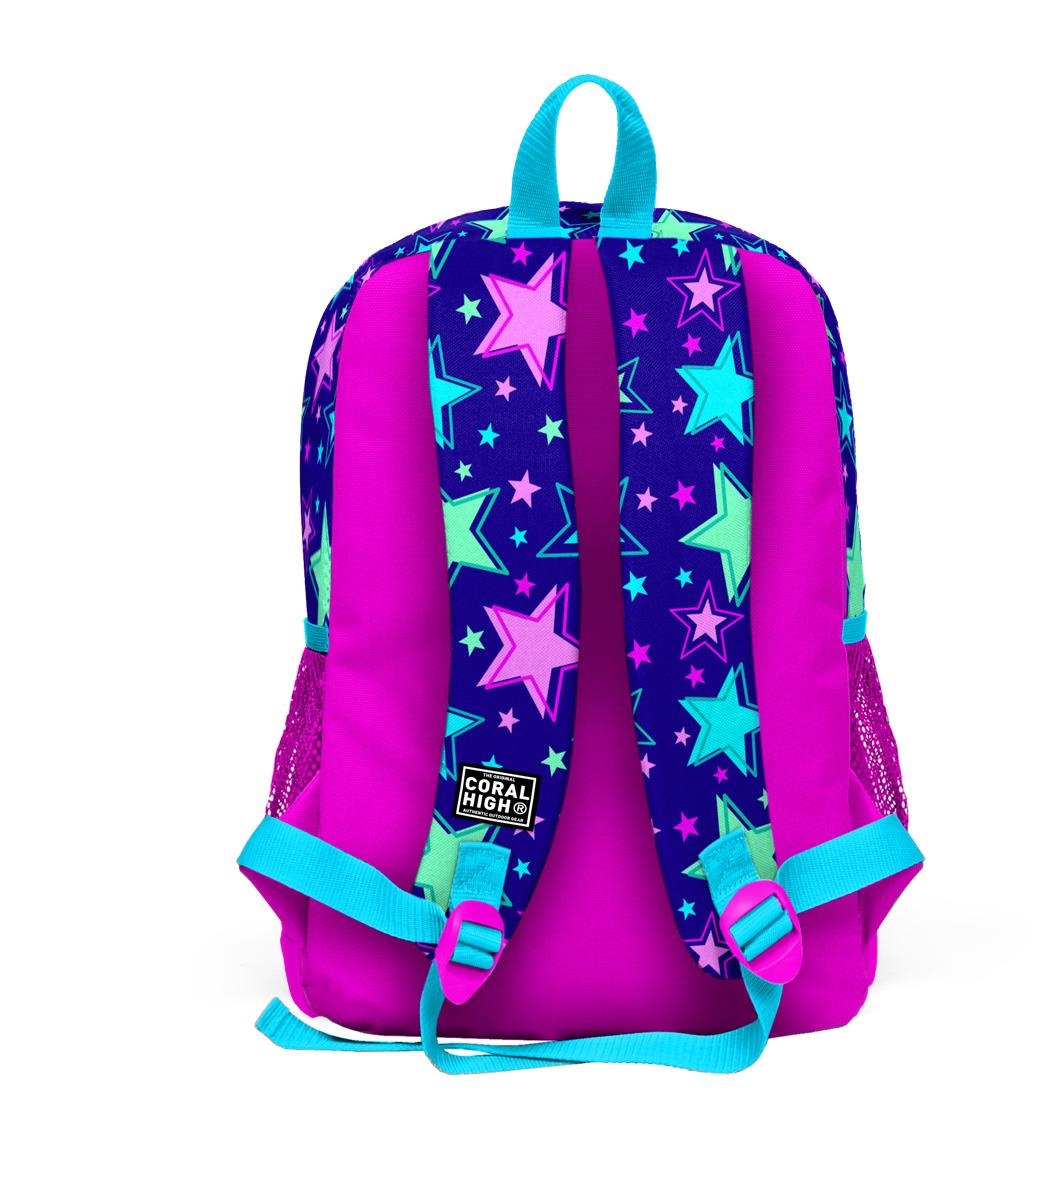 Coral High Kids Four Compartment School Backpack - Saks Pink Star Patterned